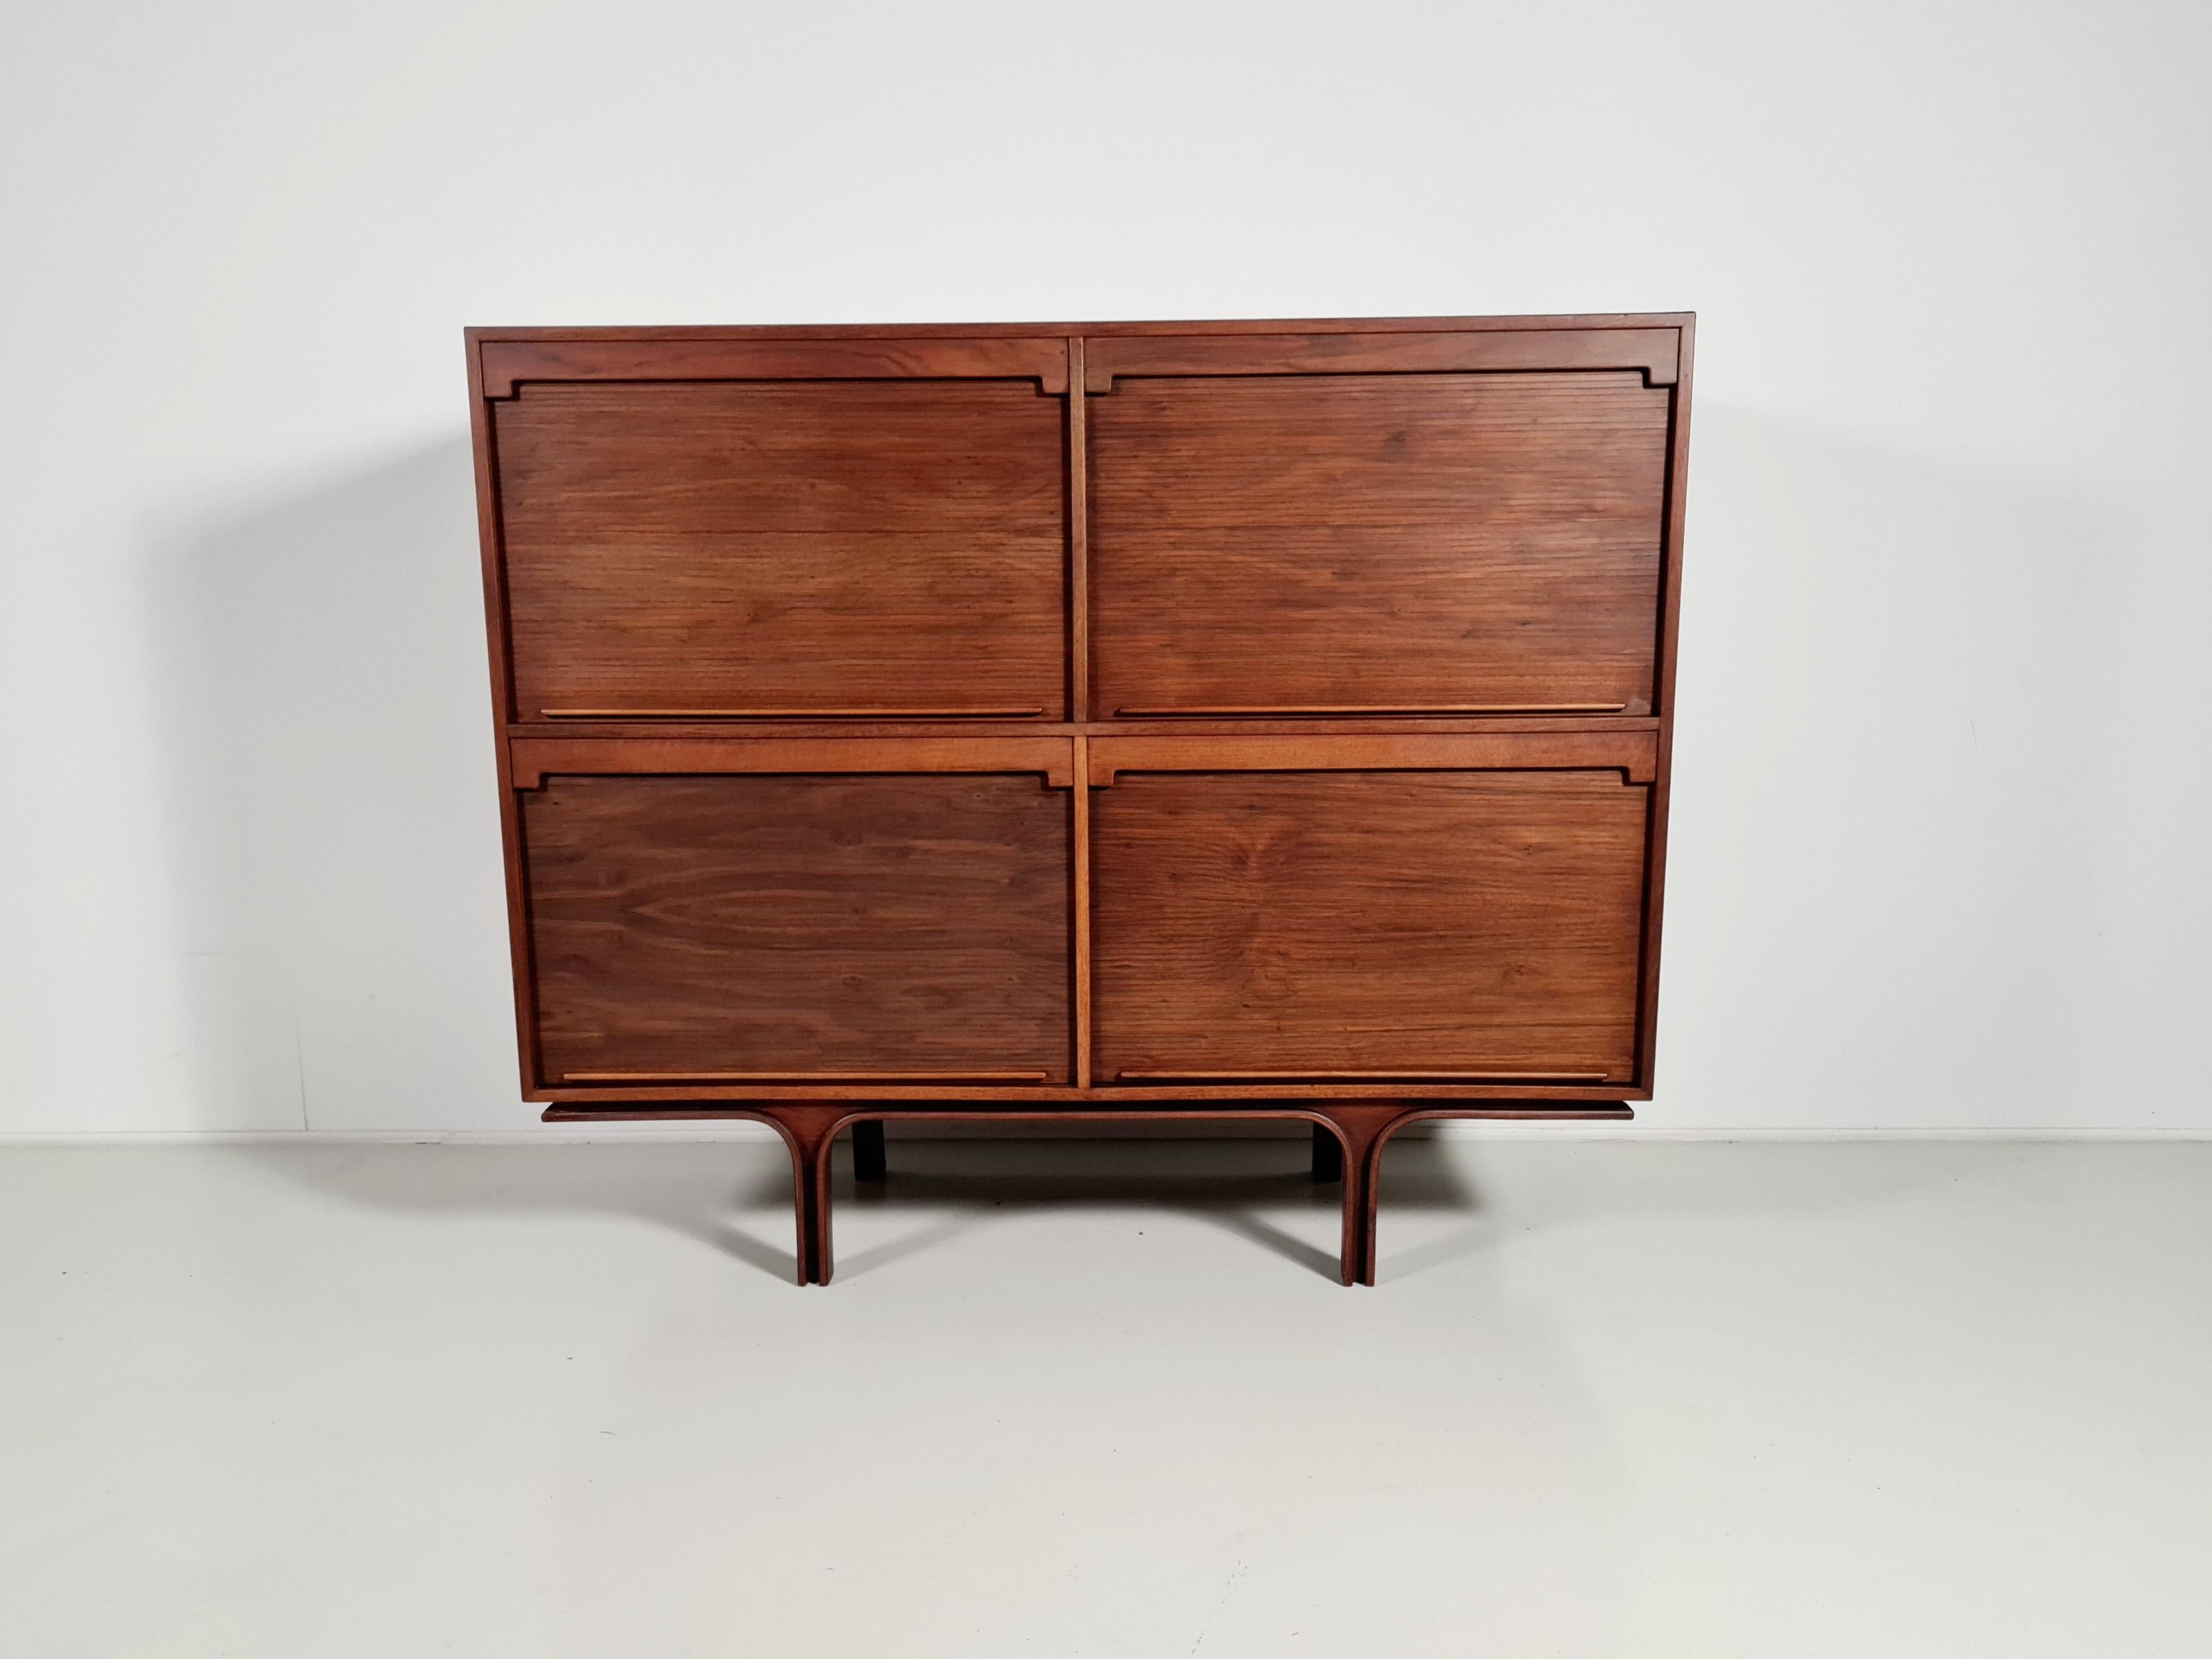 Hardwood with walnut veneer cabinet with shutters designed by Gianfranco Frattini for Bernini. Manufactured in Italy in the 1960s.